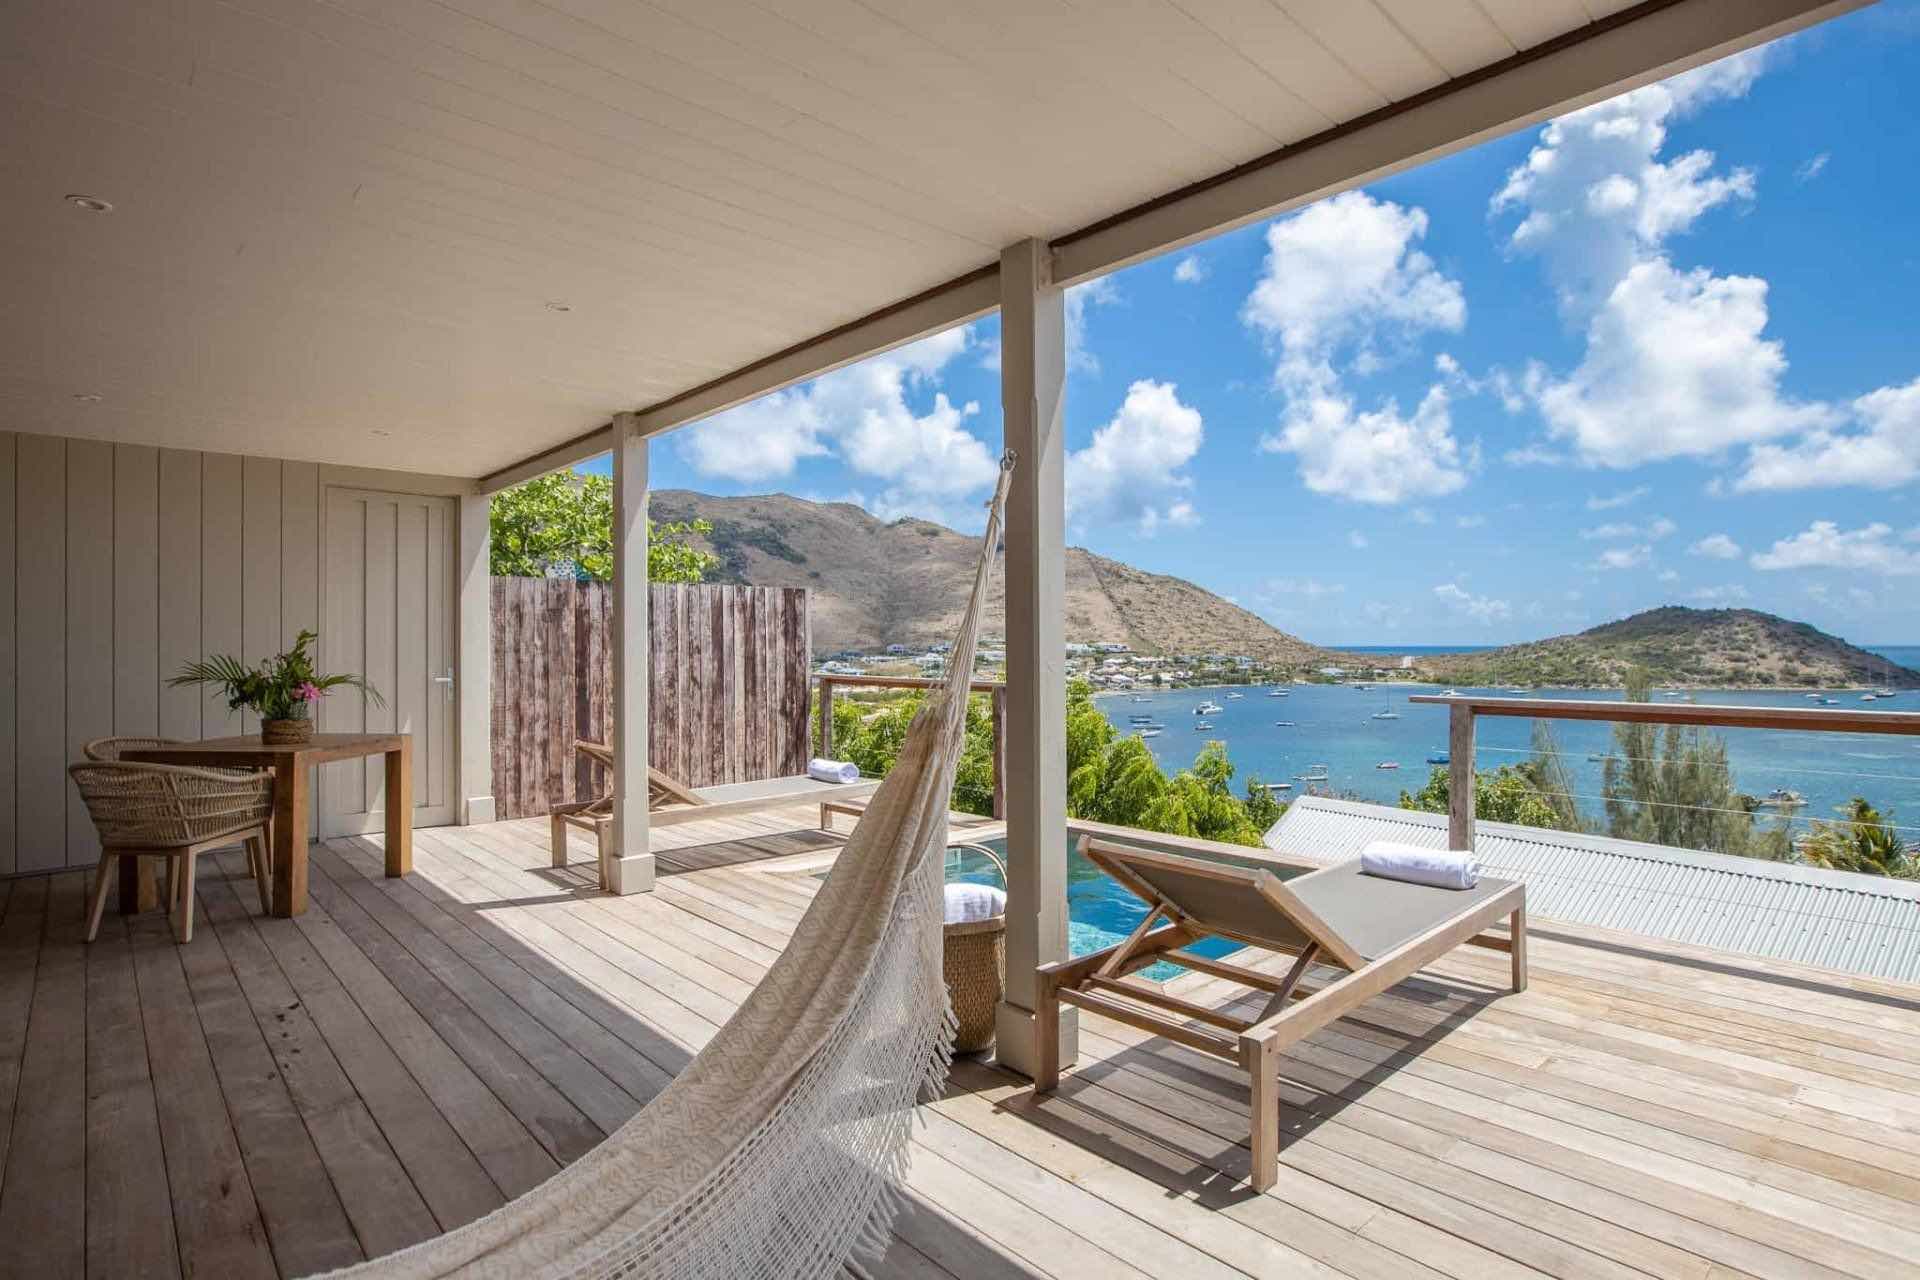 le-karibuni-boutique-hotels in St MArtin -suite-rouge balcony and hot tub